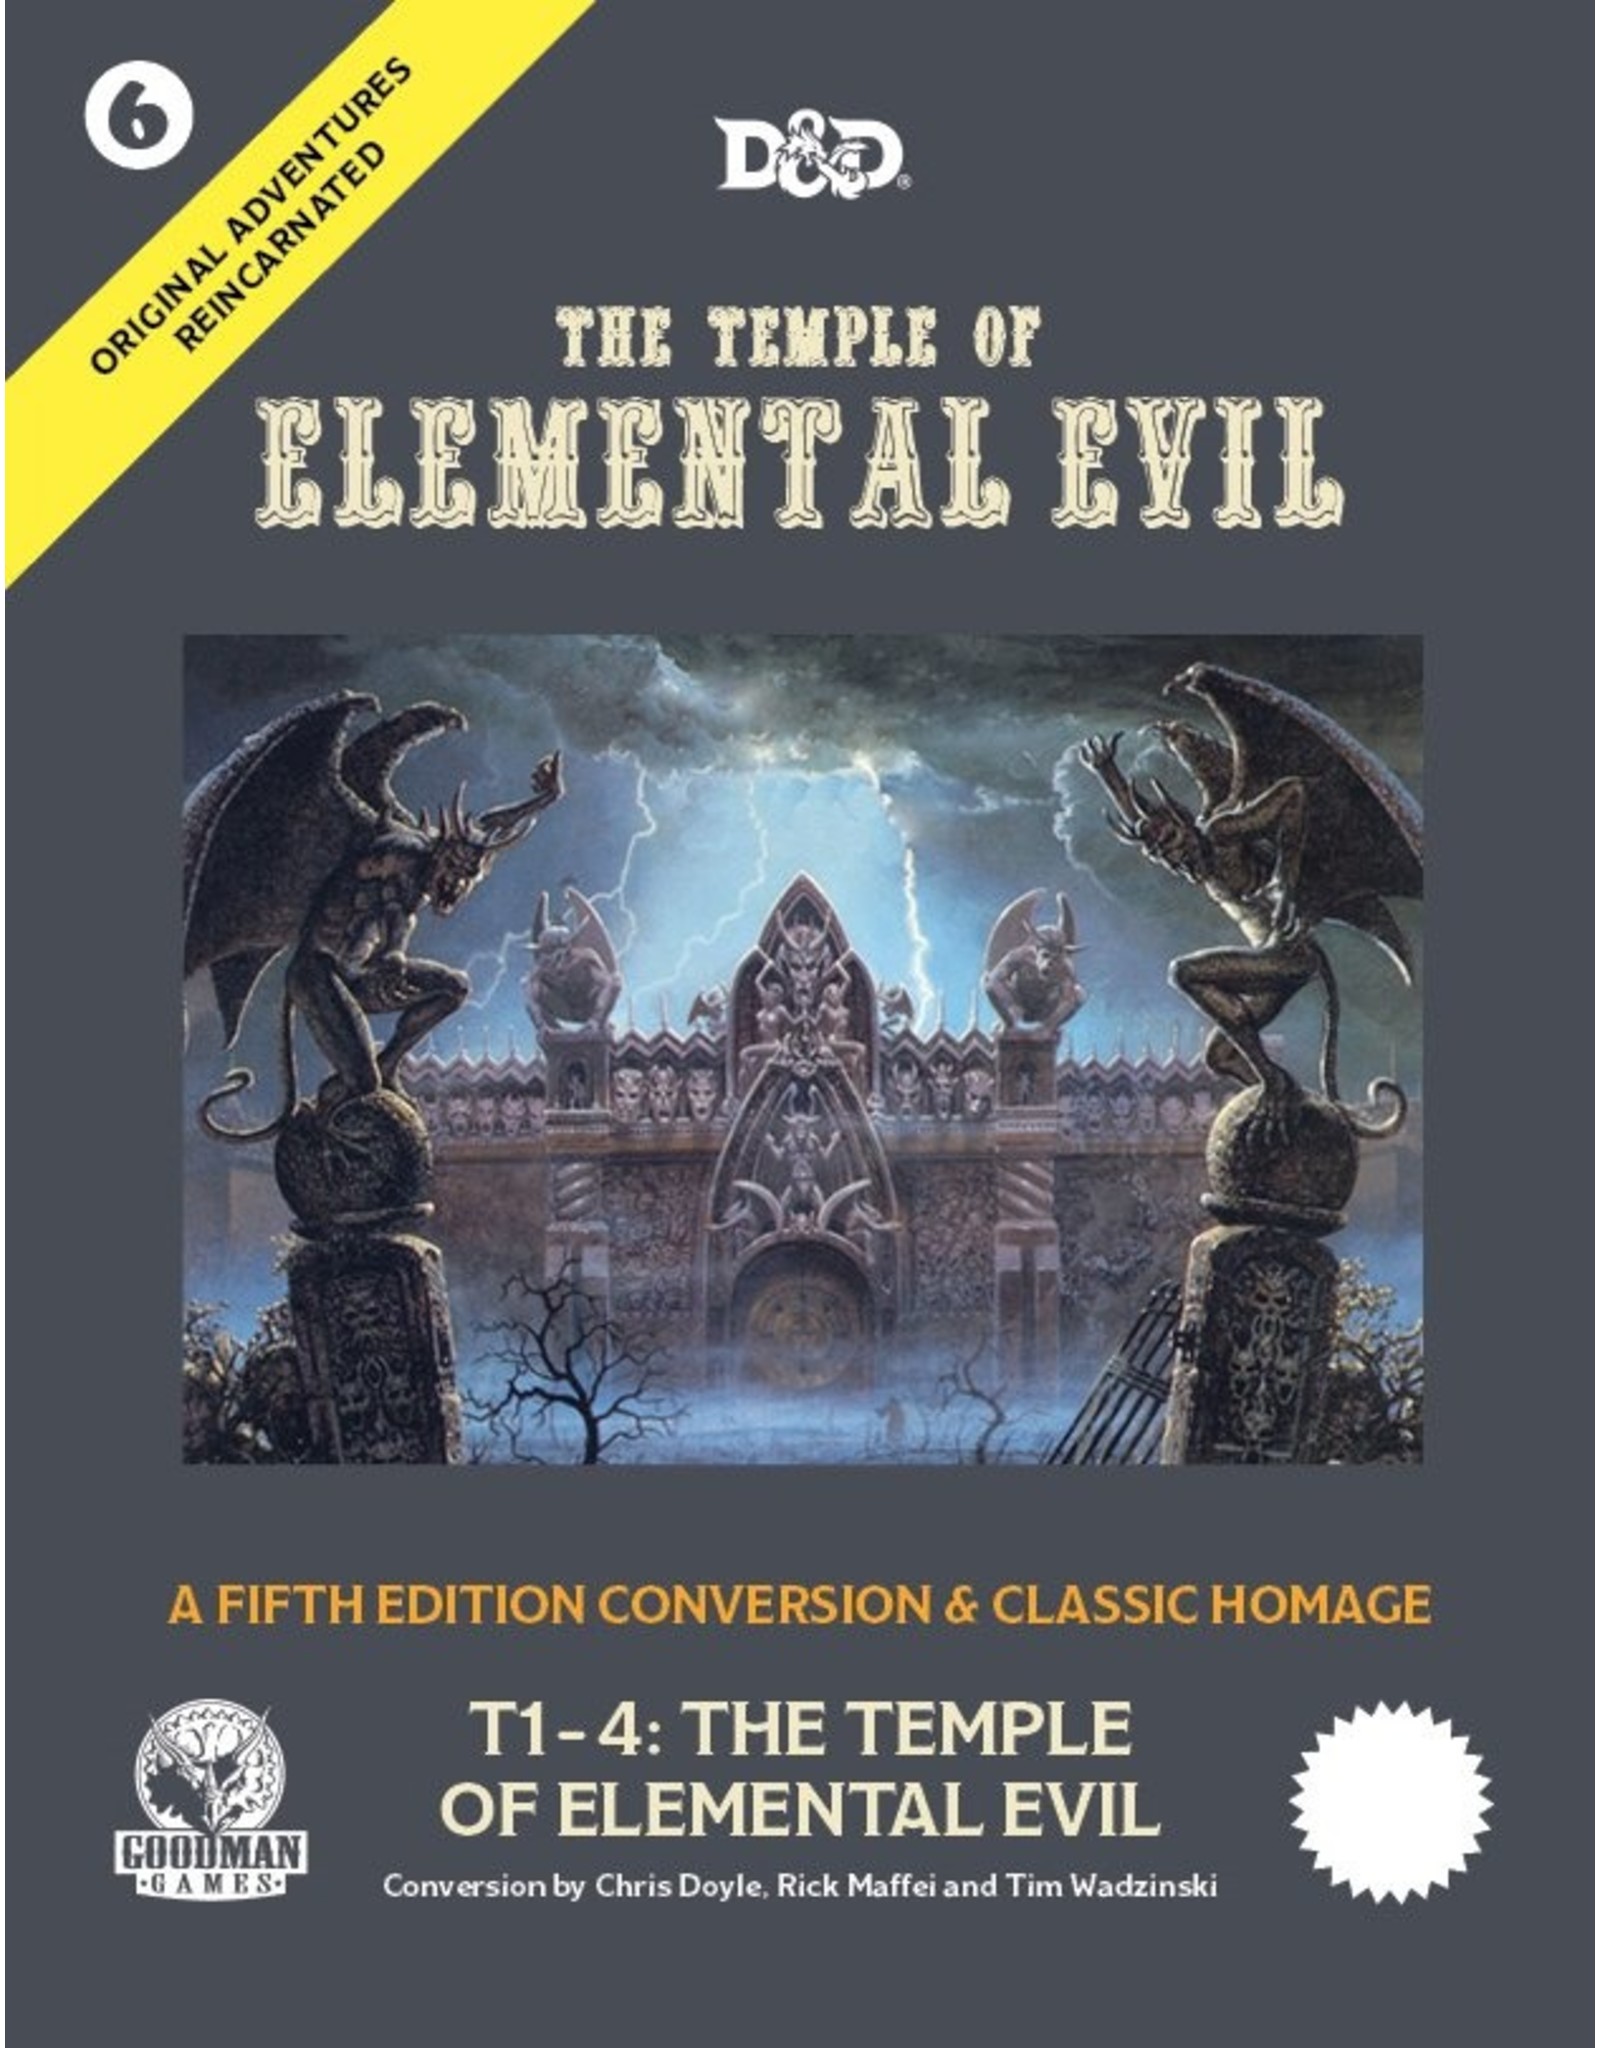 Dungeons & Dragons D&D - The temple of elemental evil